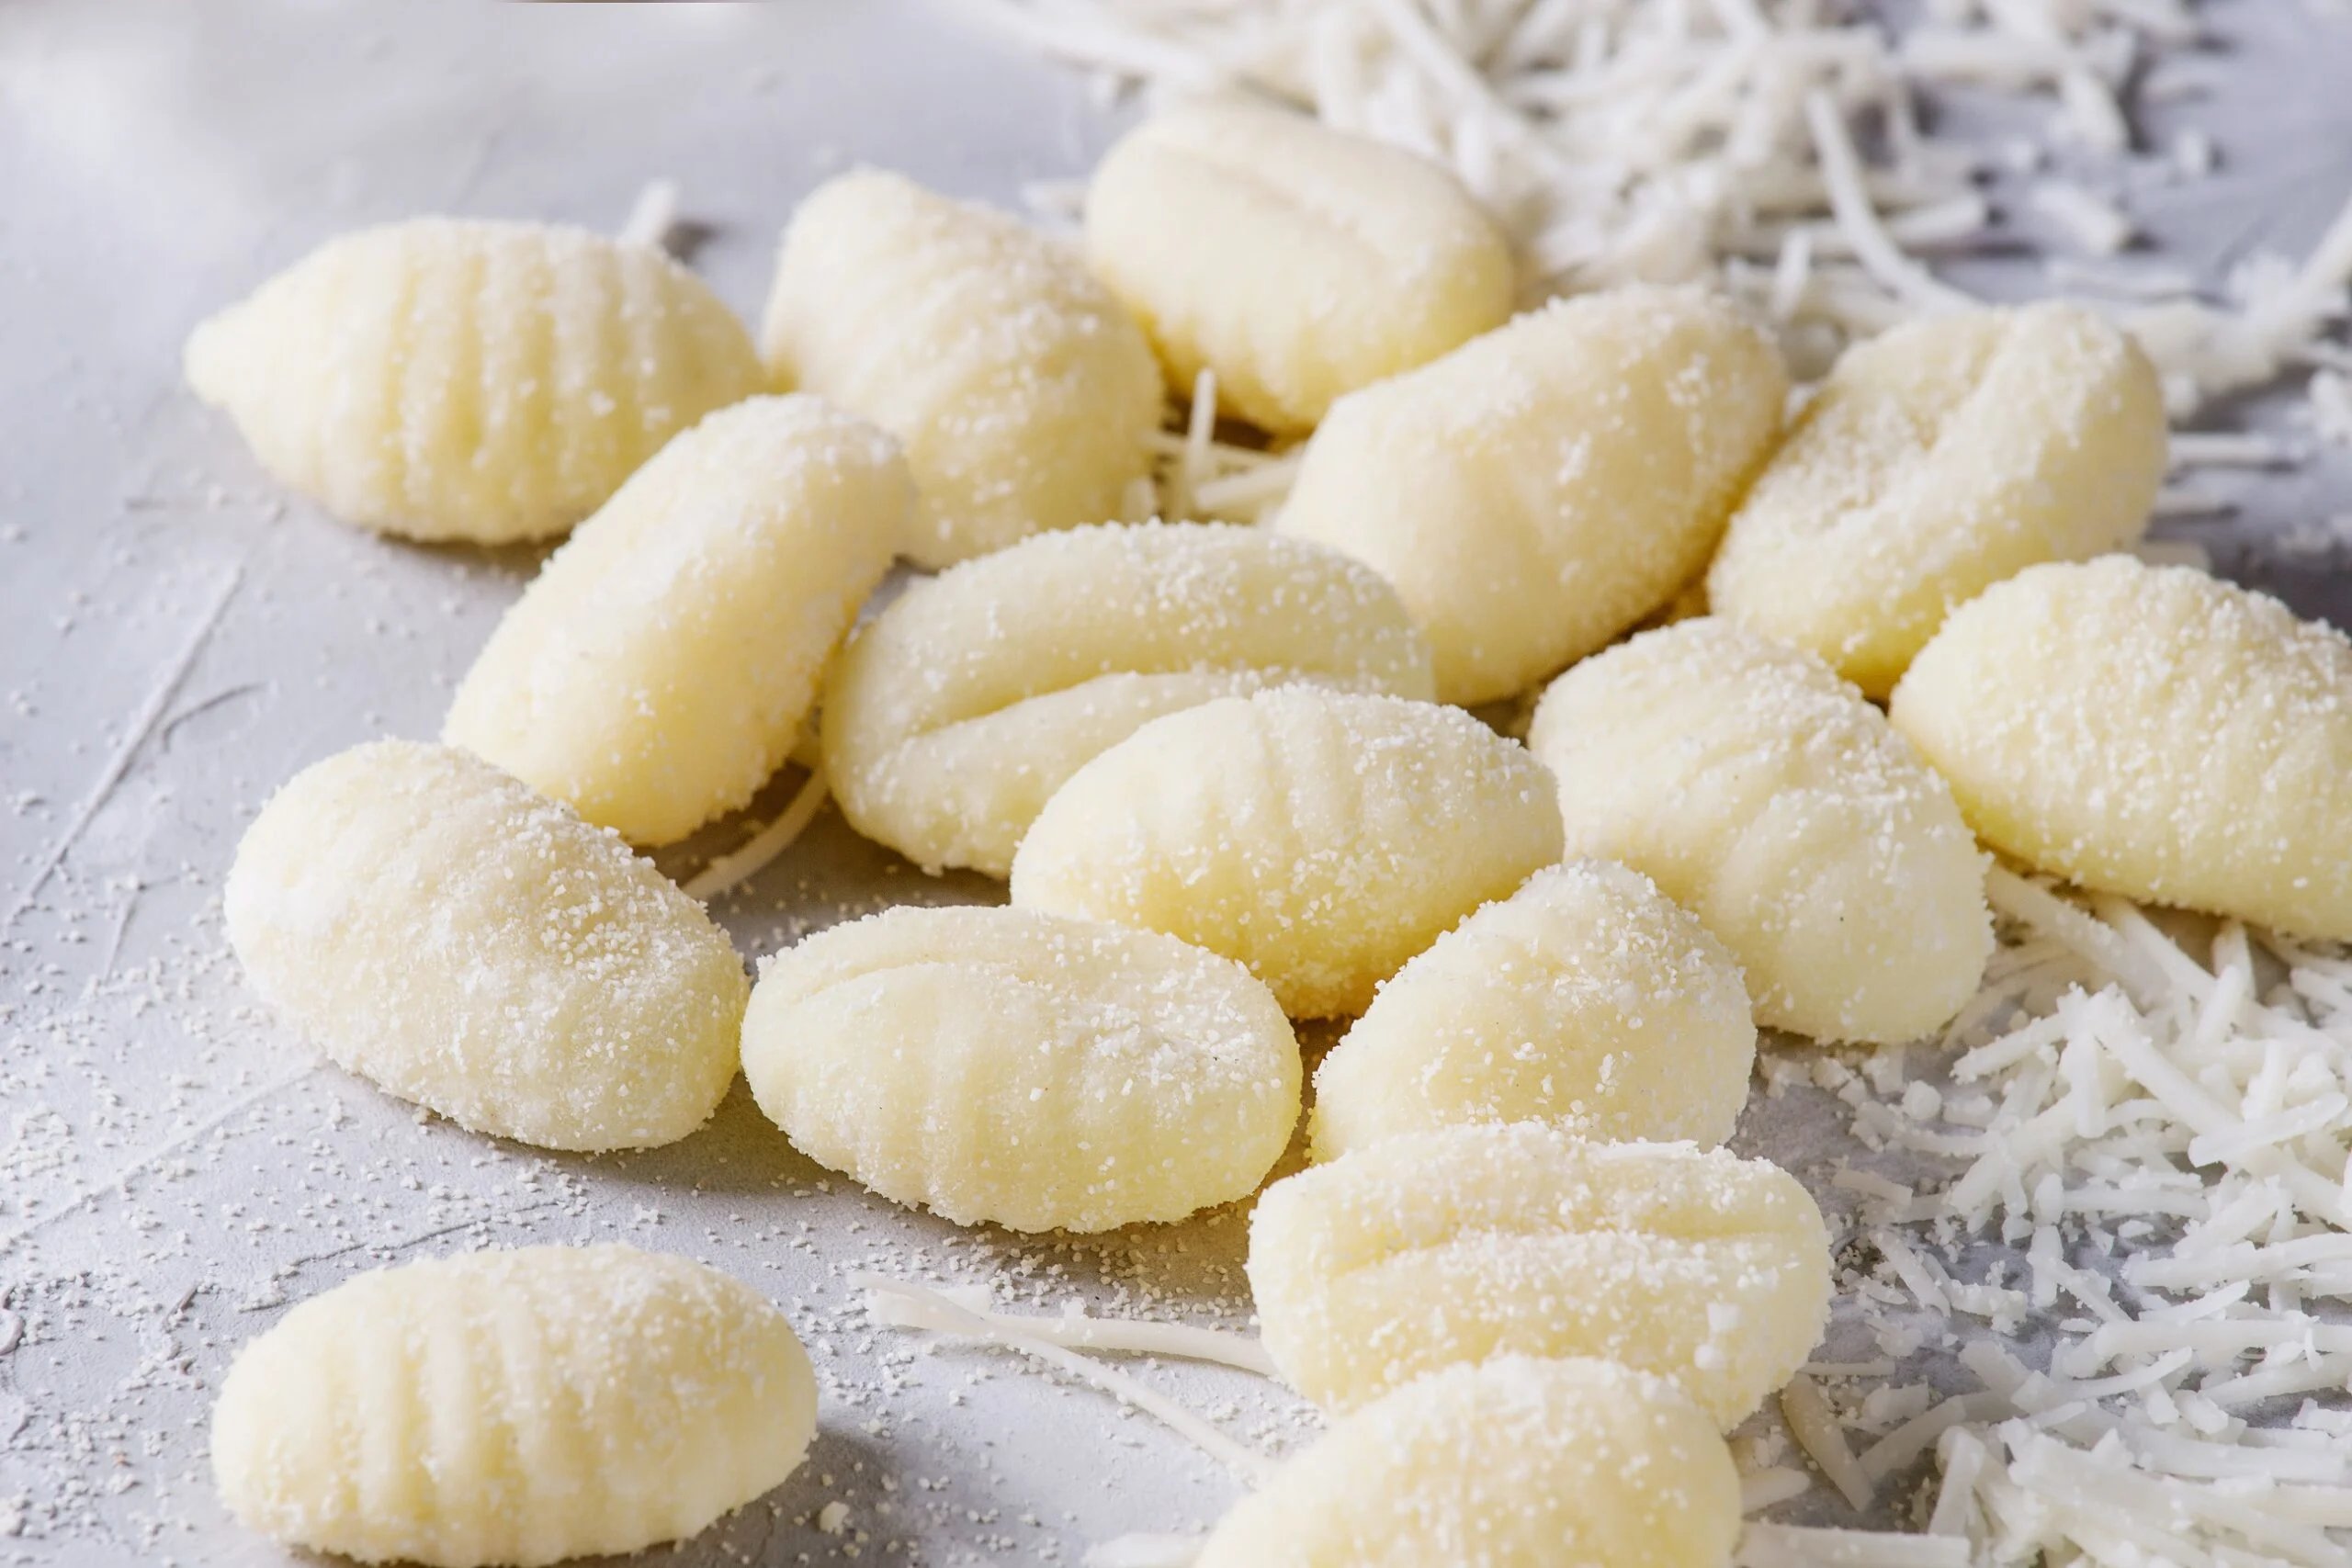 Raw,uncooked,potato,gnocchi,with,flour,and,grated,parmesan,cheese